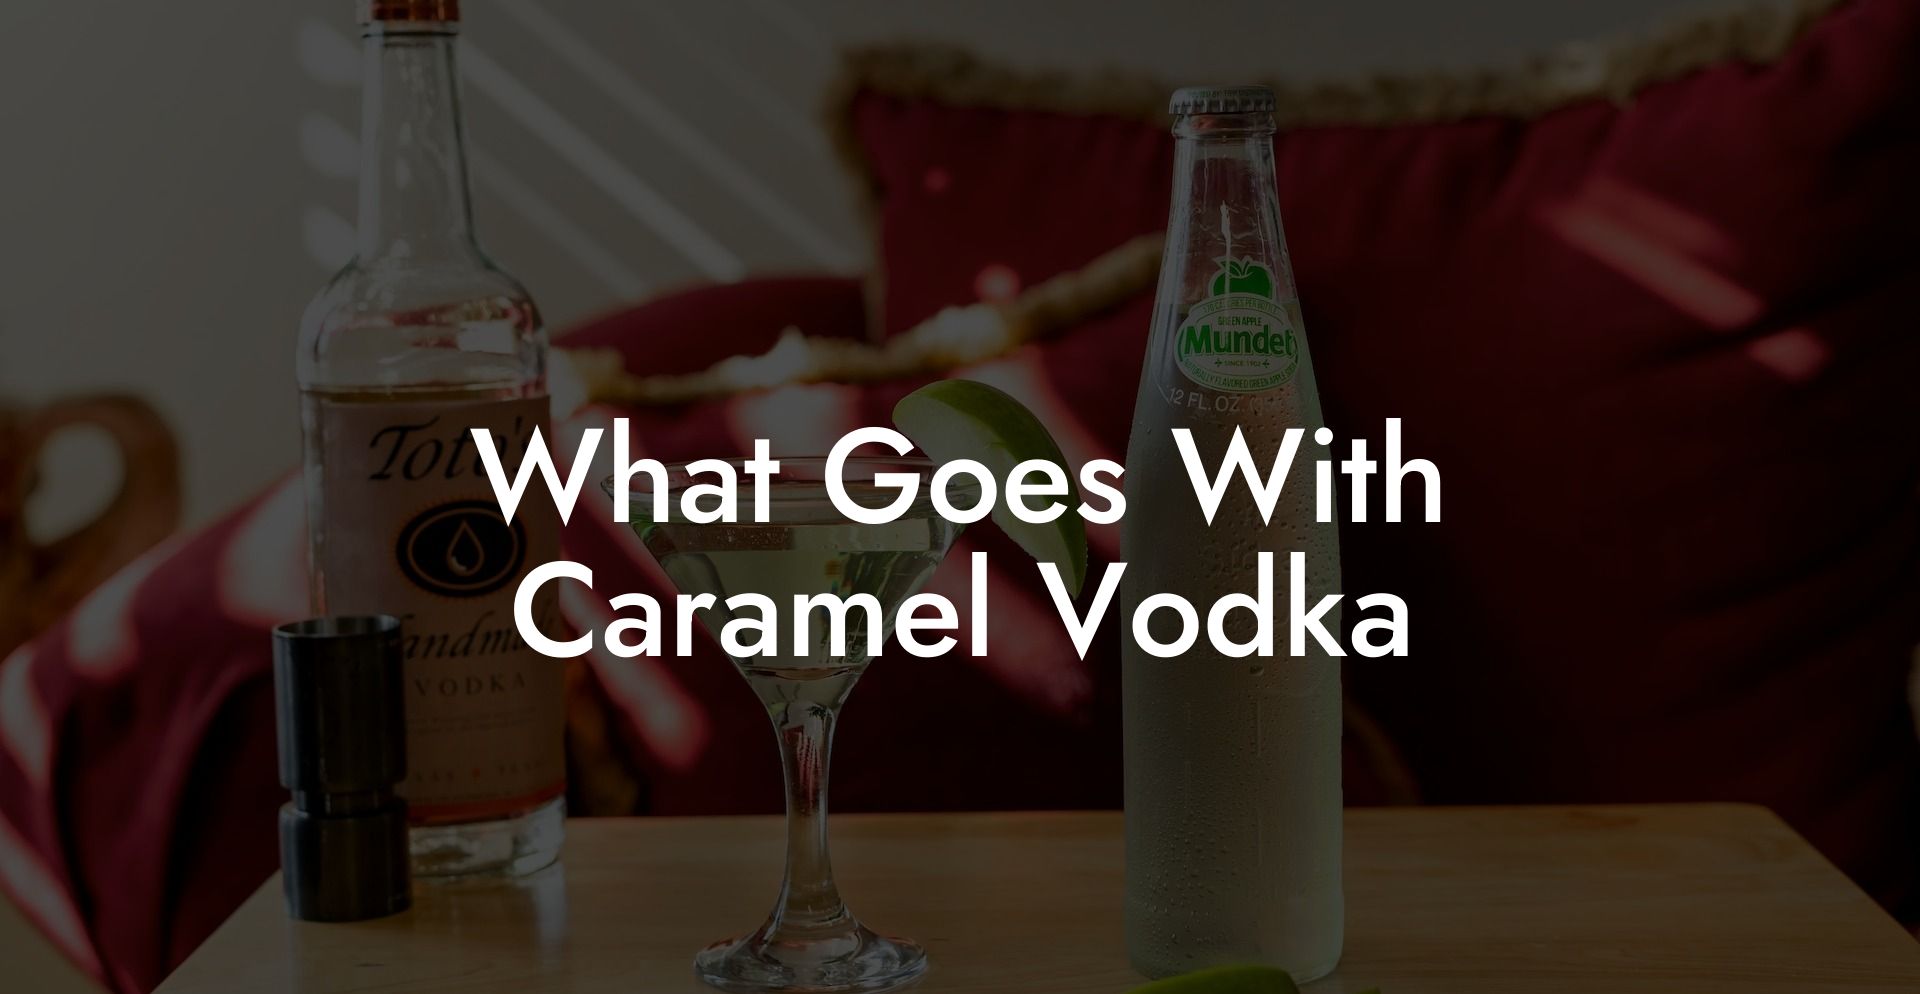 What Goes With Caramel Vodka